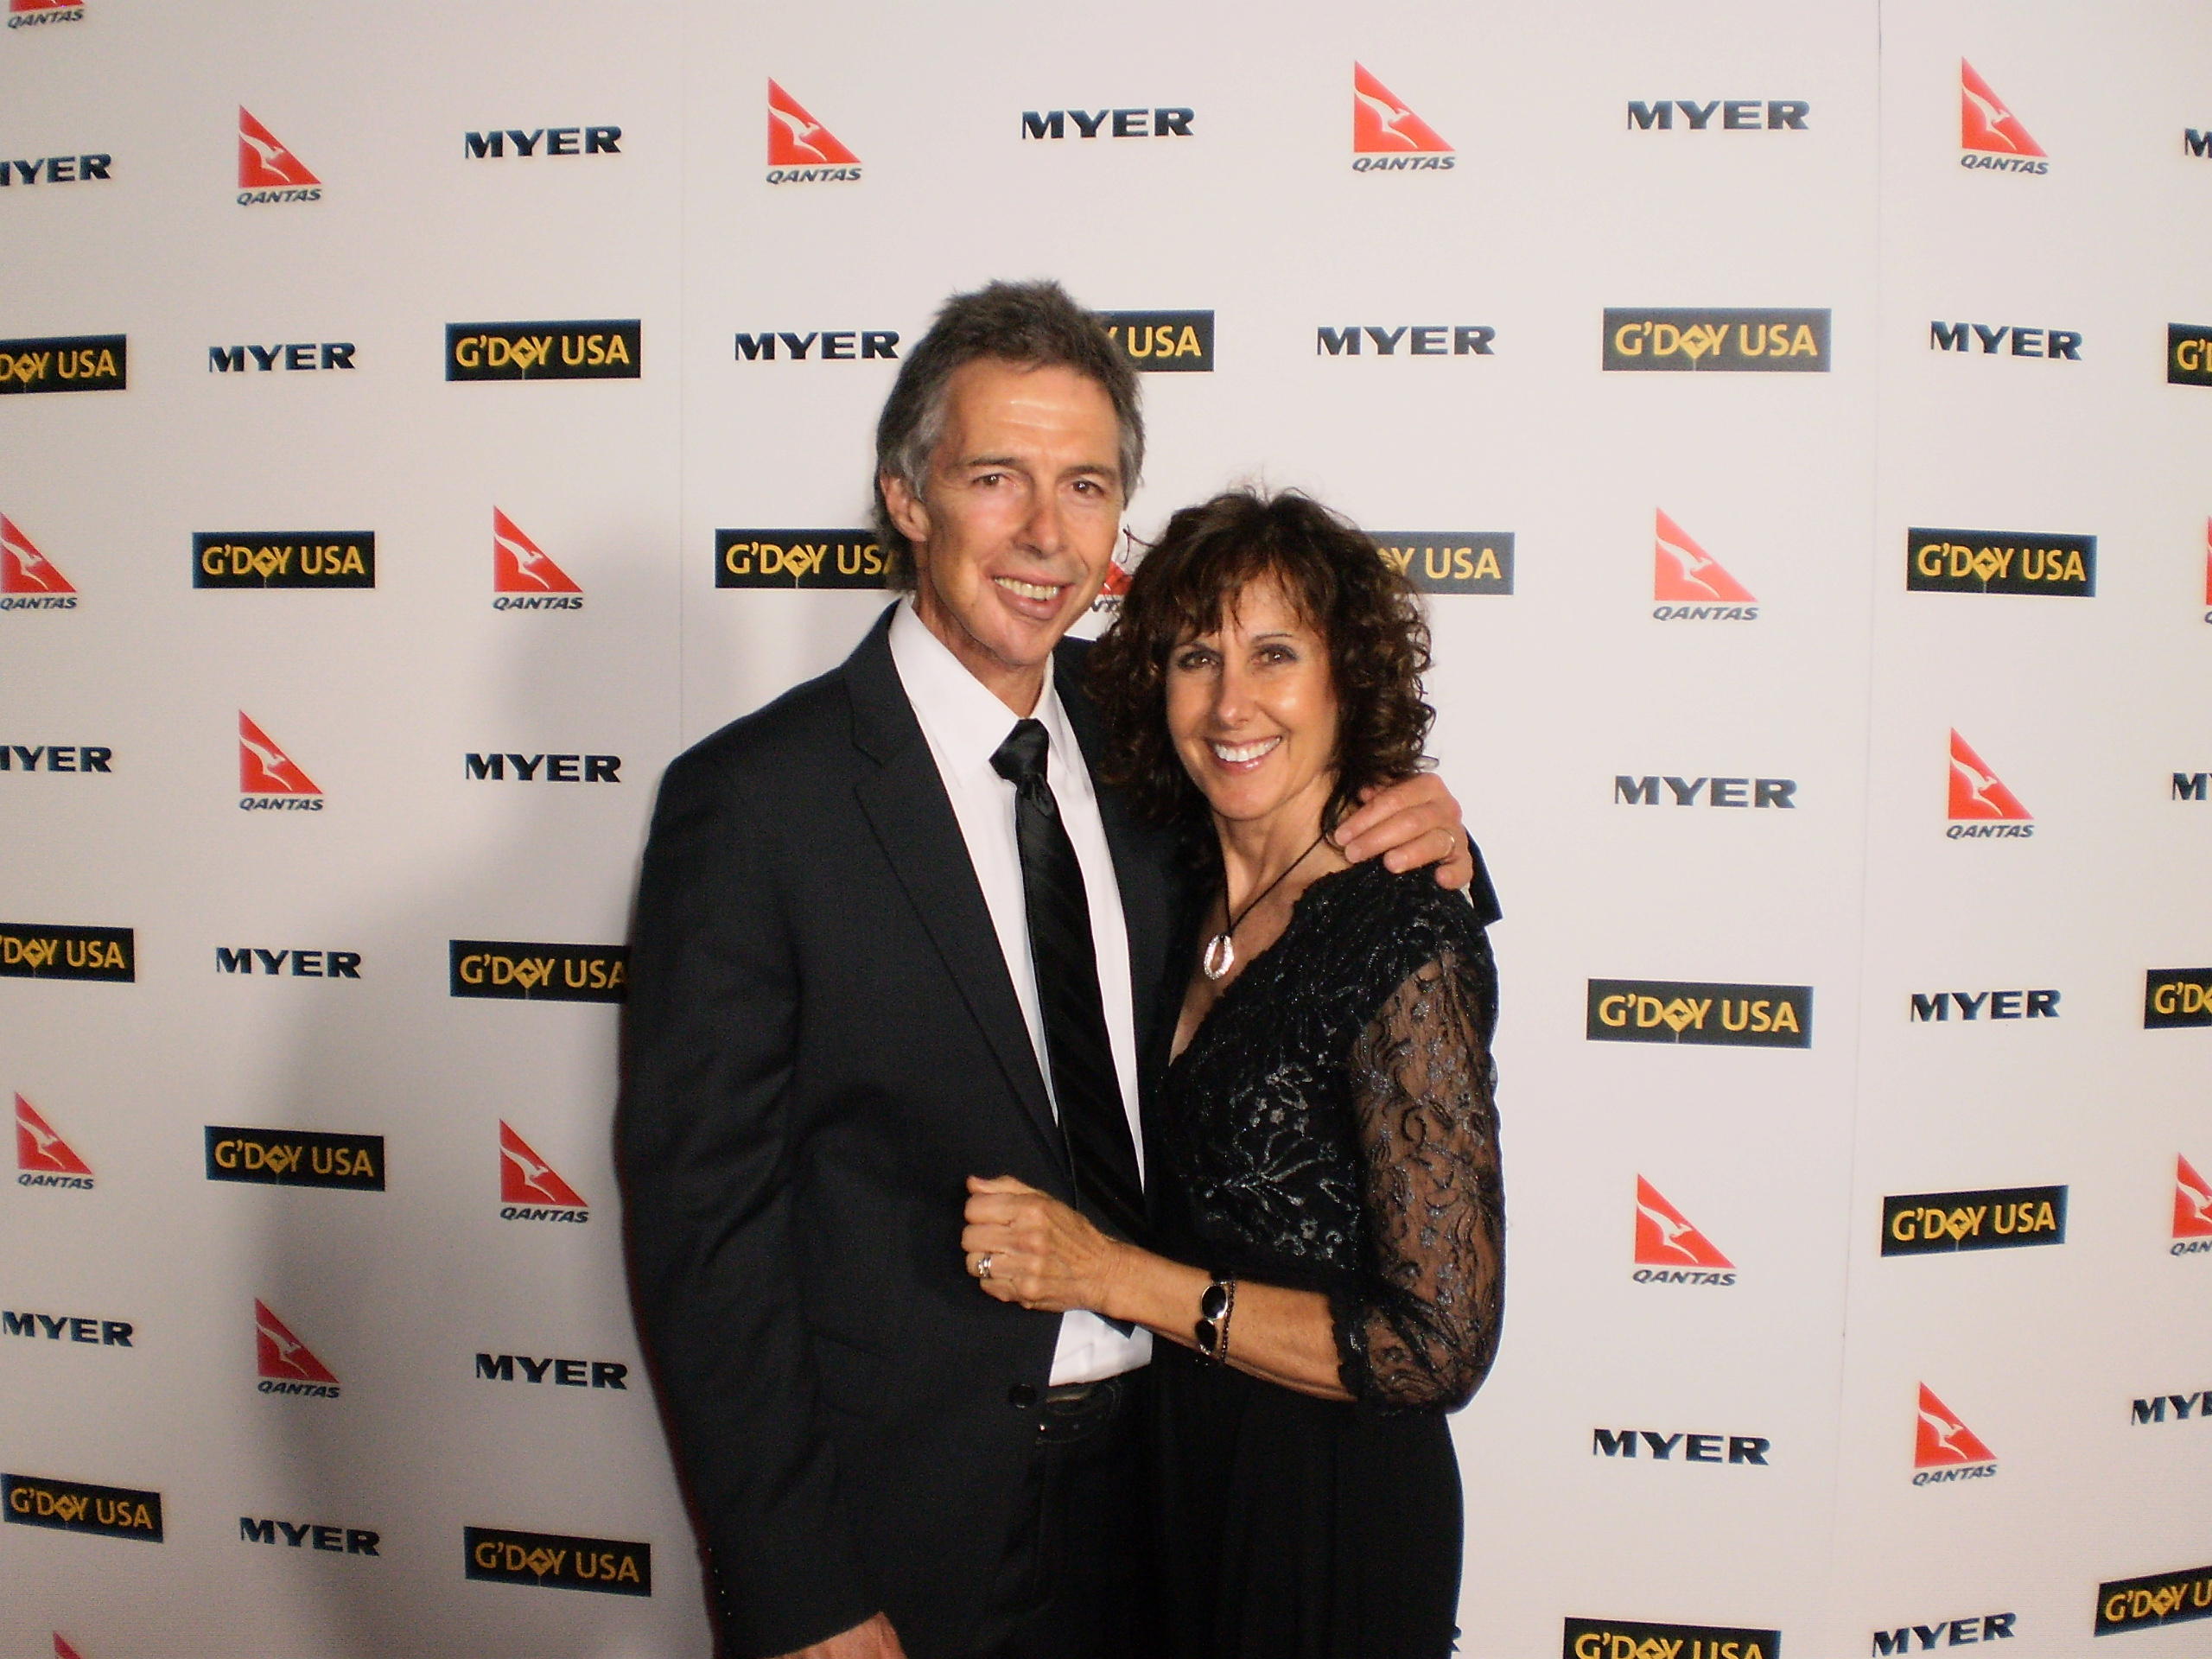 James Houston Turner and his wife, Wendy Turner, at G'day USA, Los Angeles.